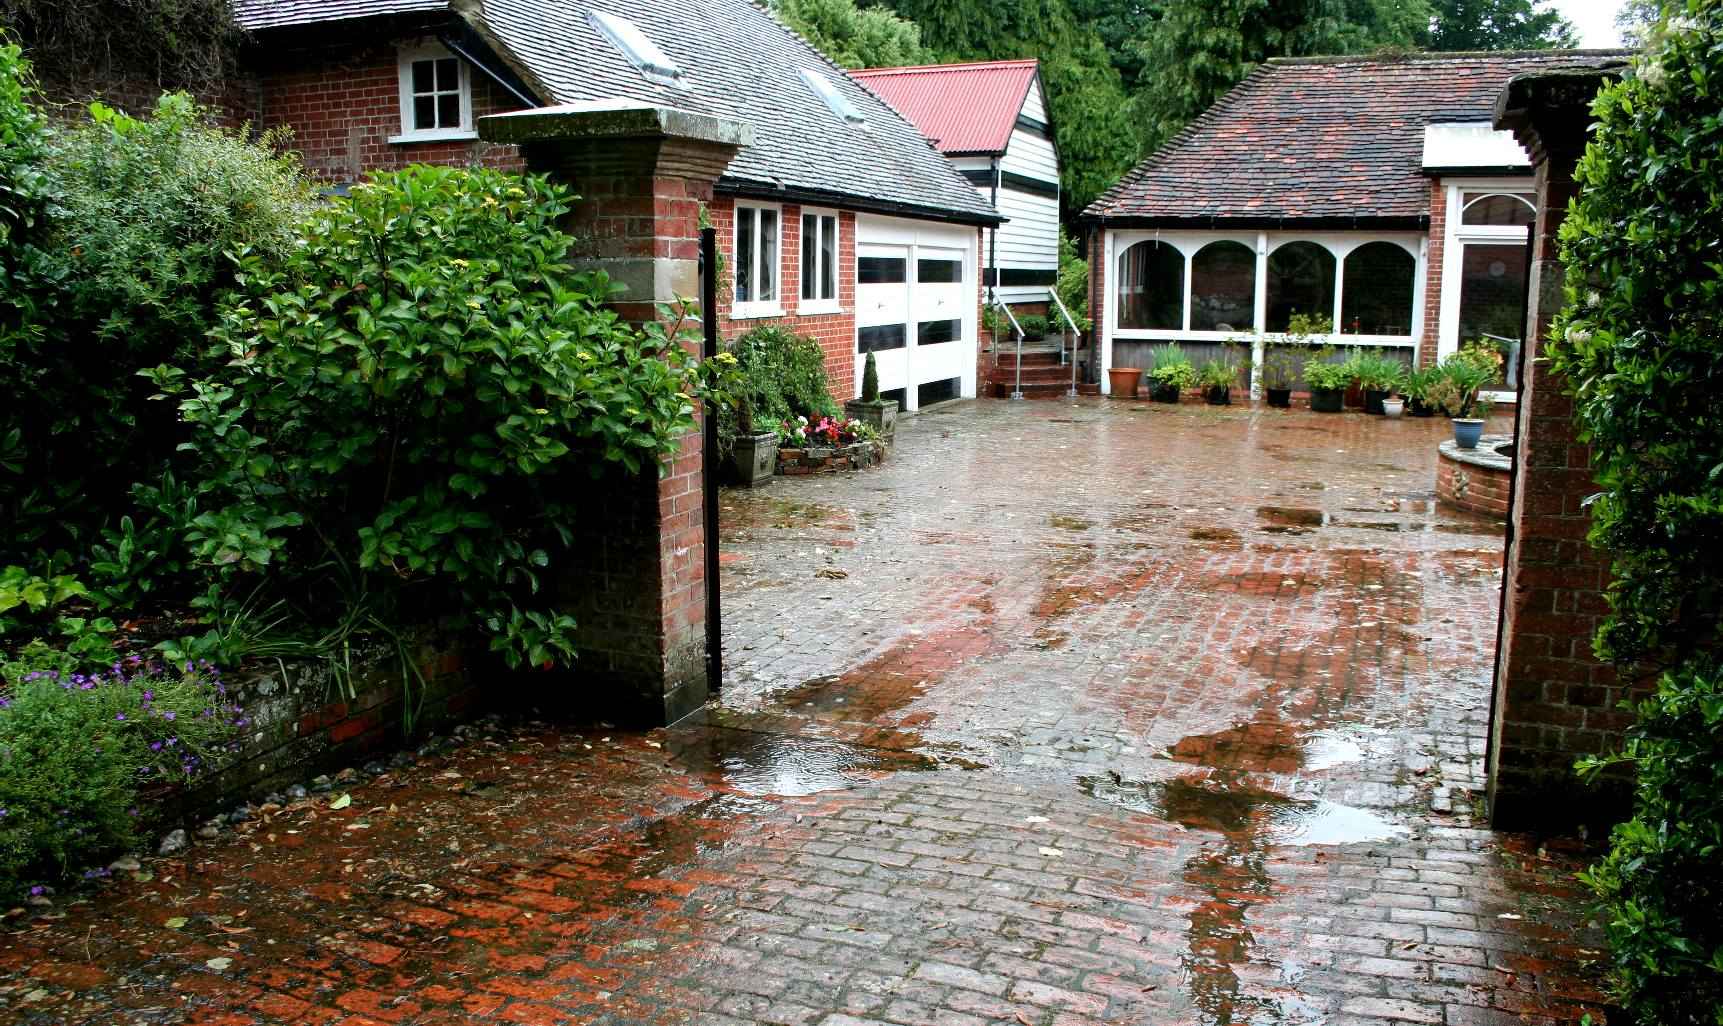 Flooding in the Old Rectory courtyard in June of 2019